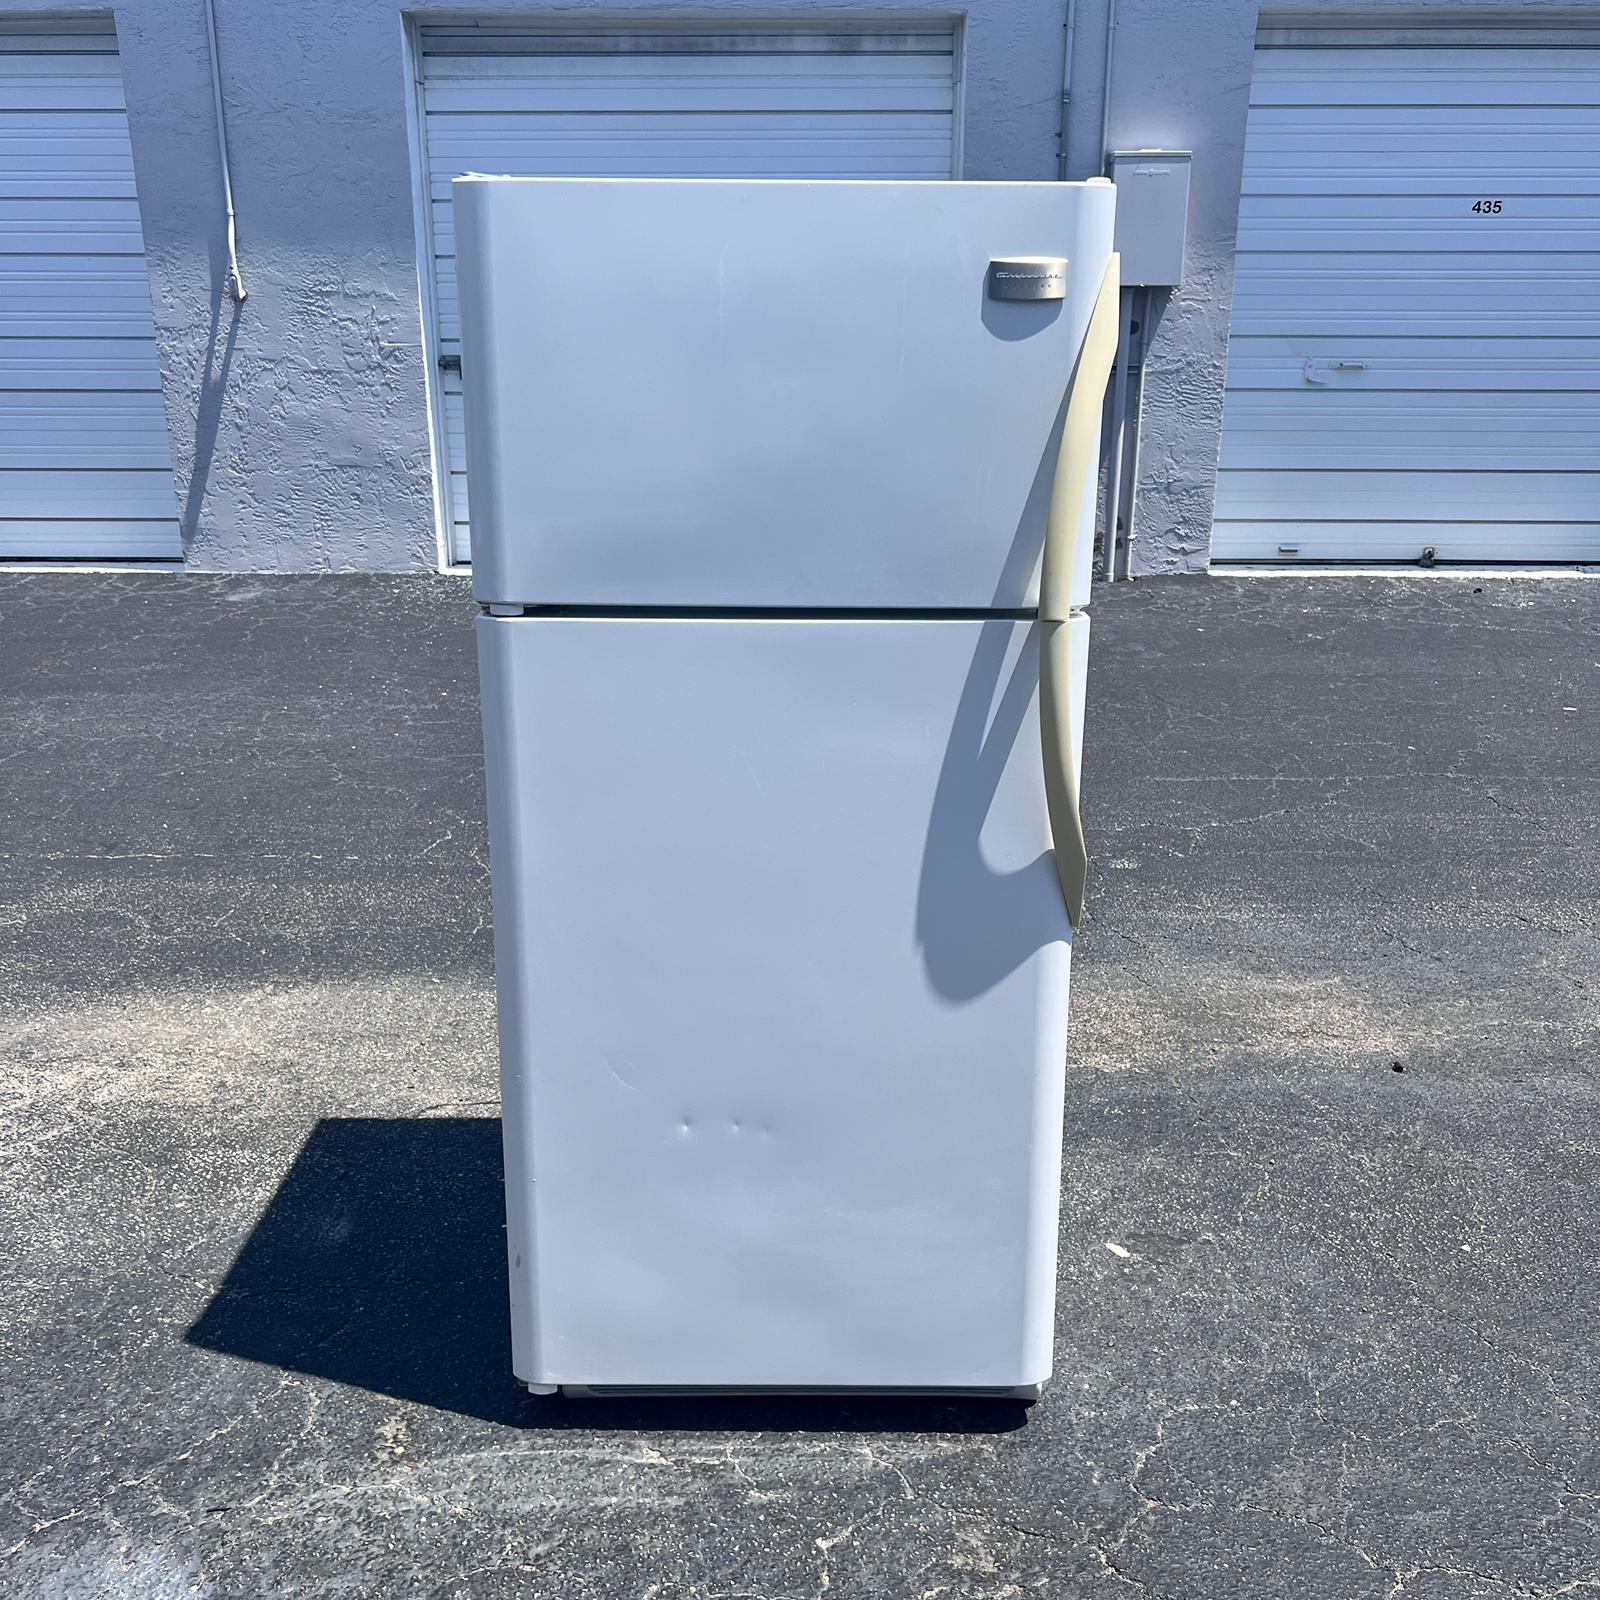 Frigidaire Top and Bottom Refrigerator with Ice maker